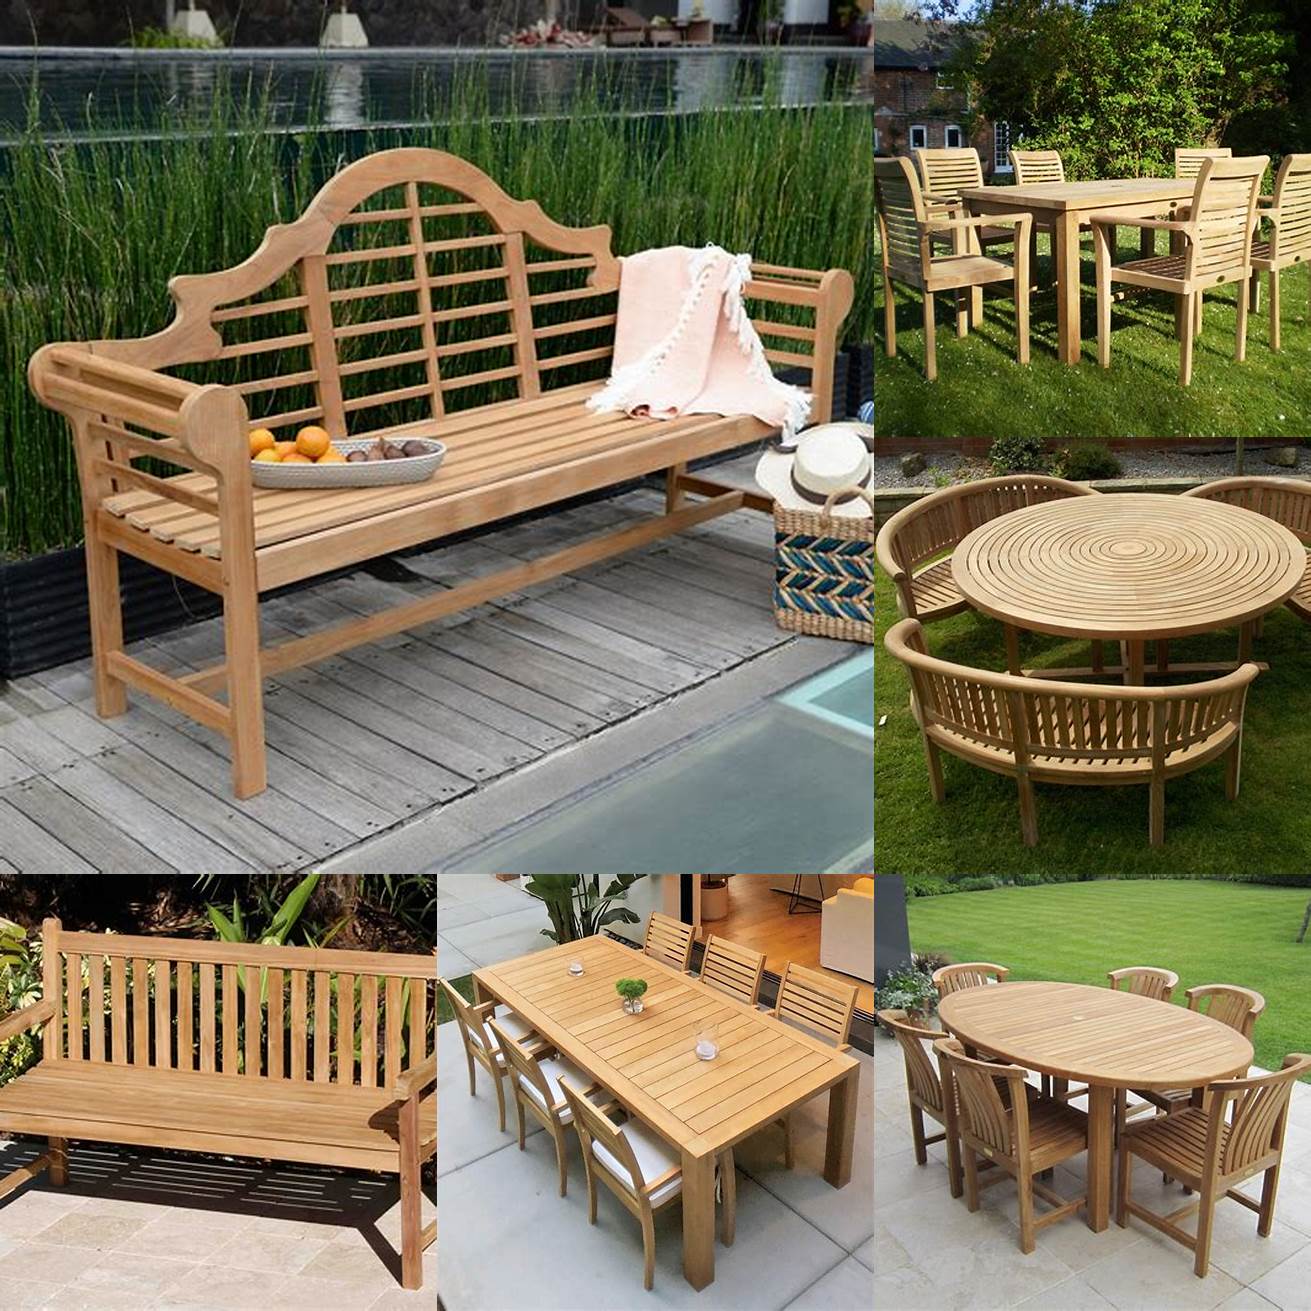 A pair of teak outdoor benches with a matching table